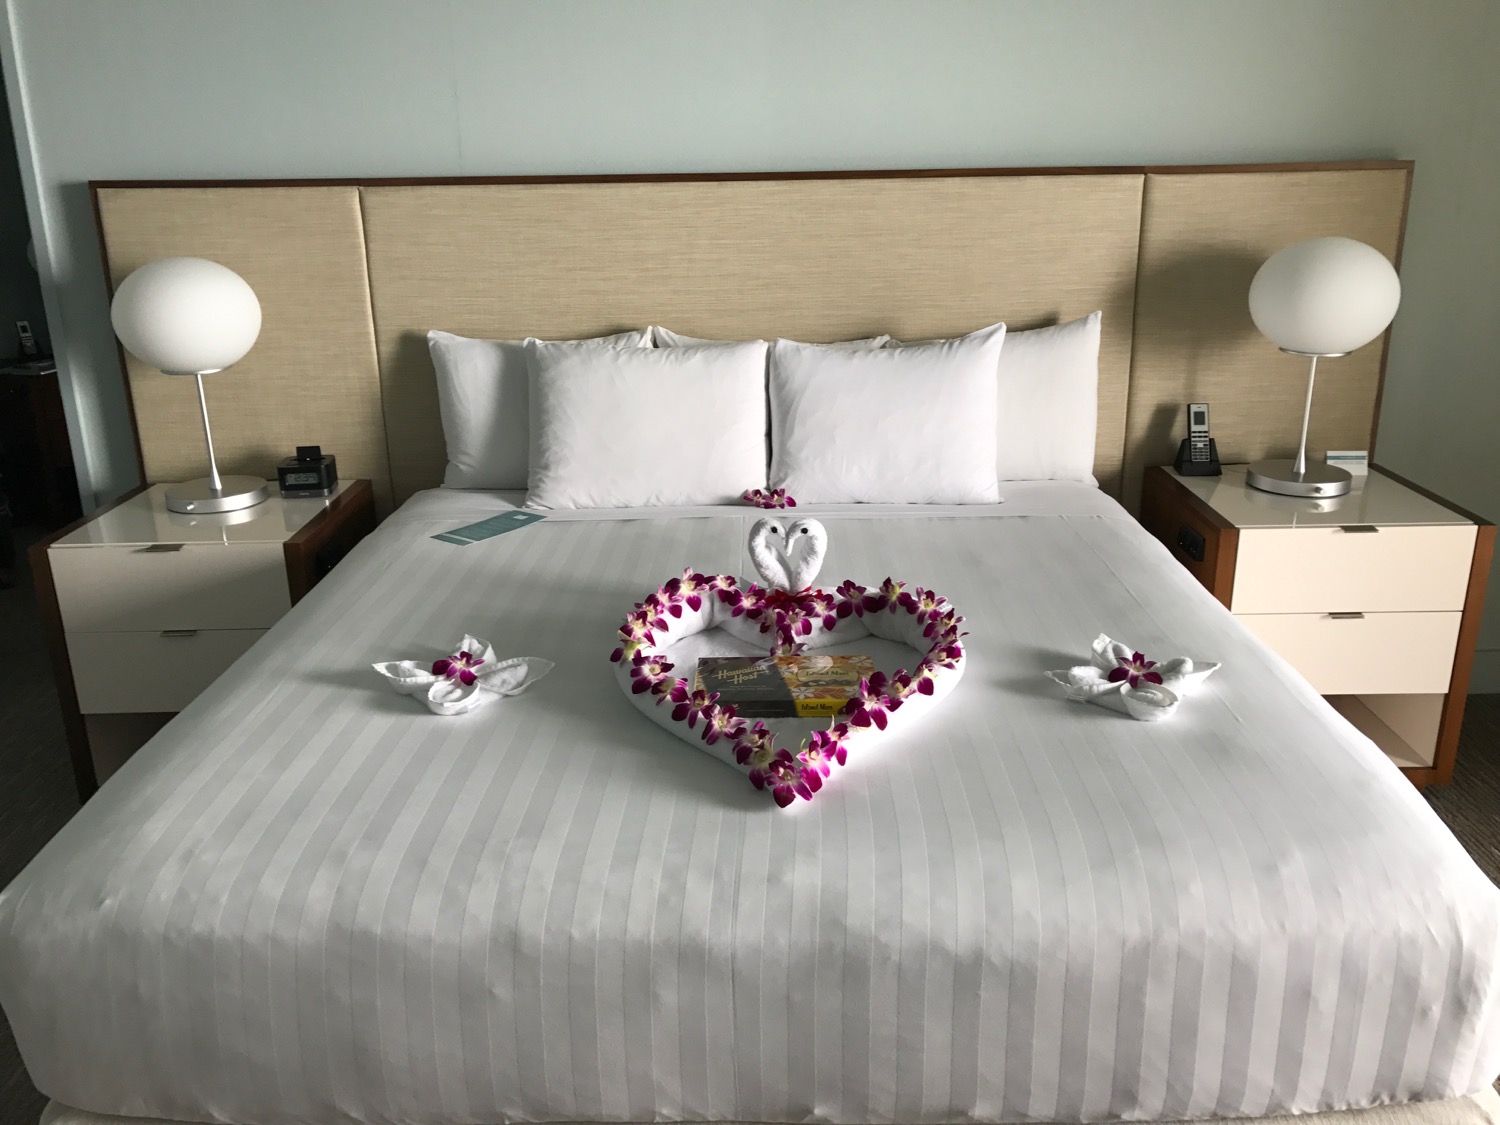 a bed with a heart shaped flower decoration